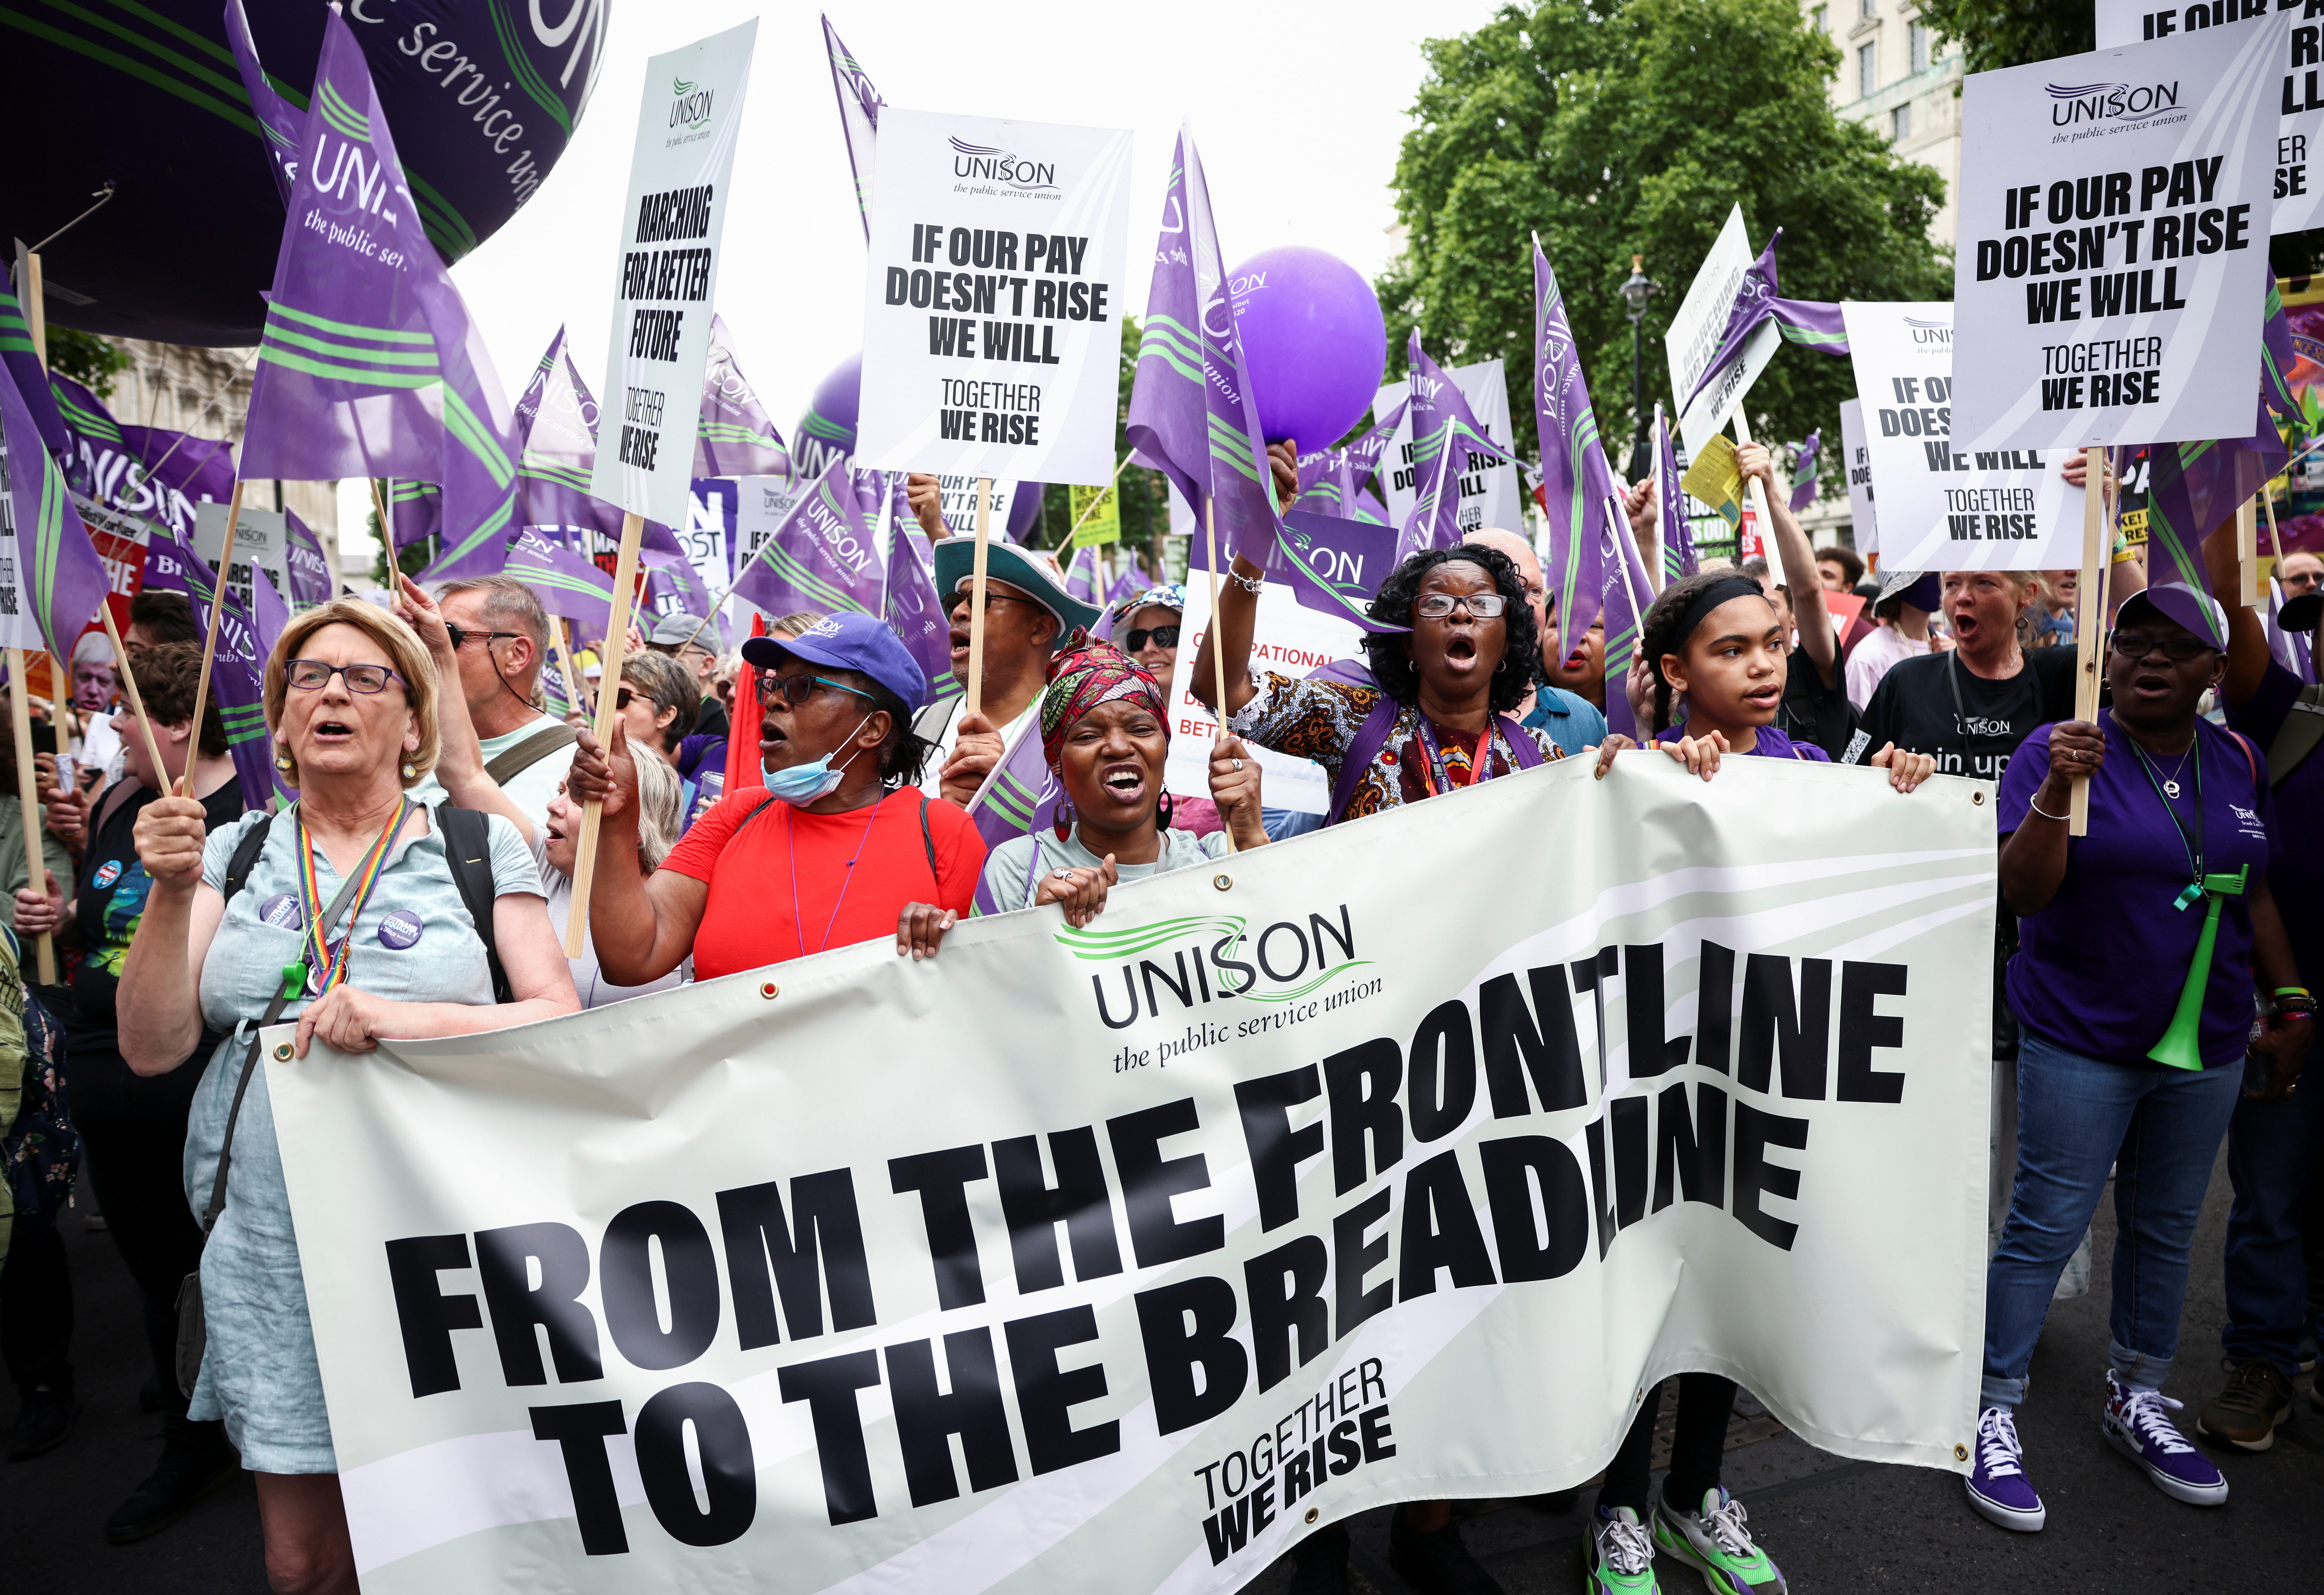 'Britain Deserves Better' Trade union protest march in London